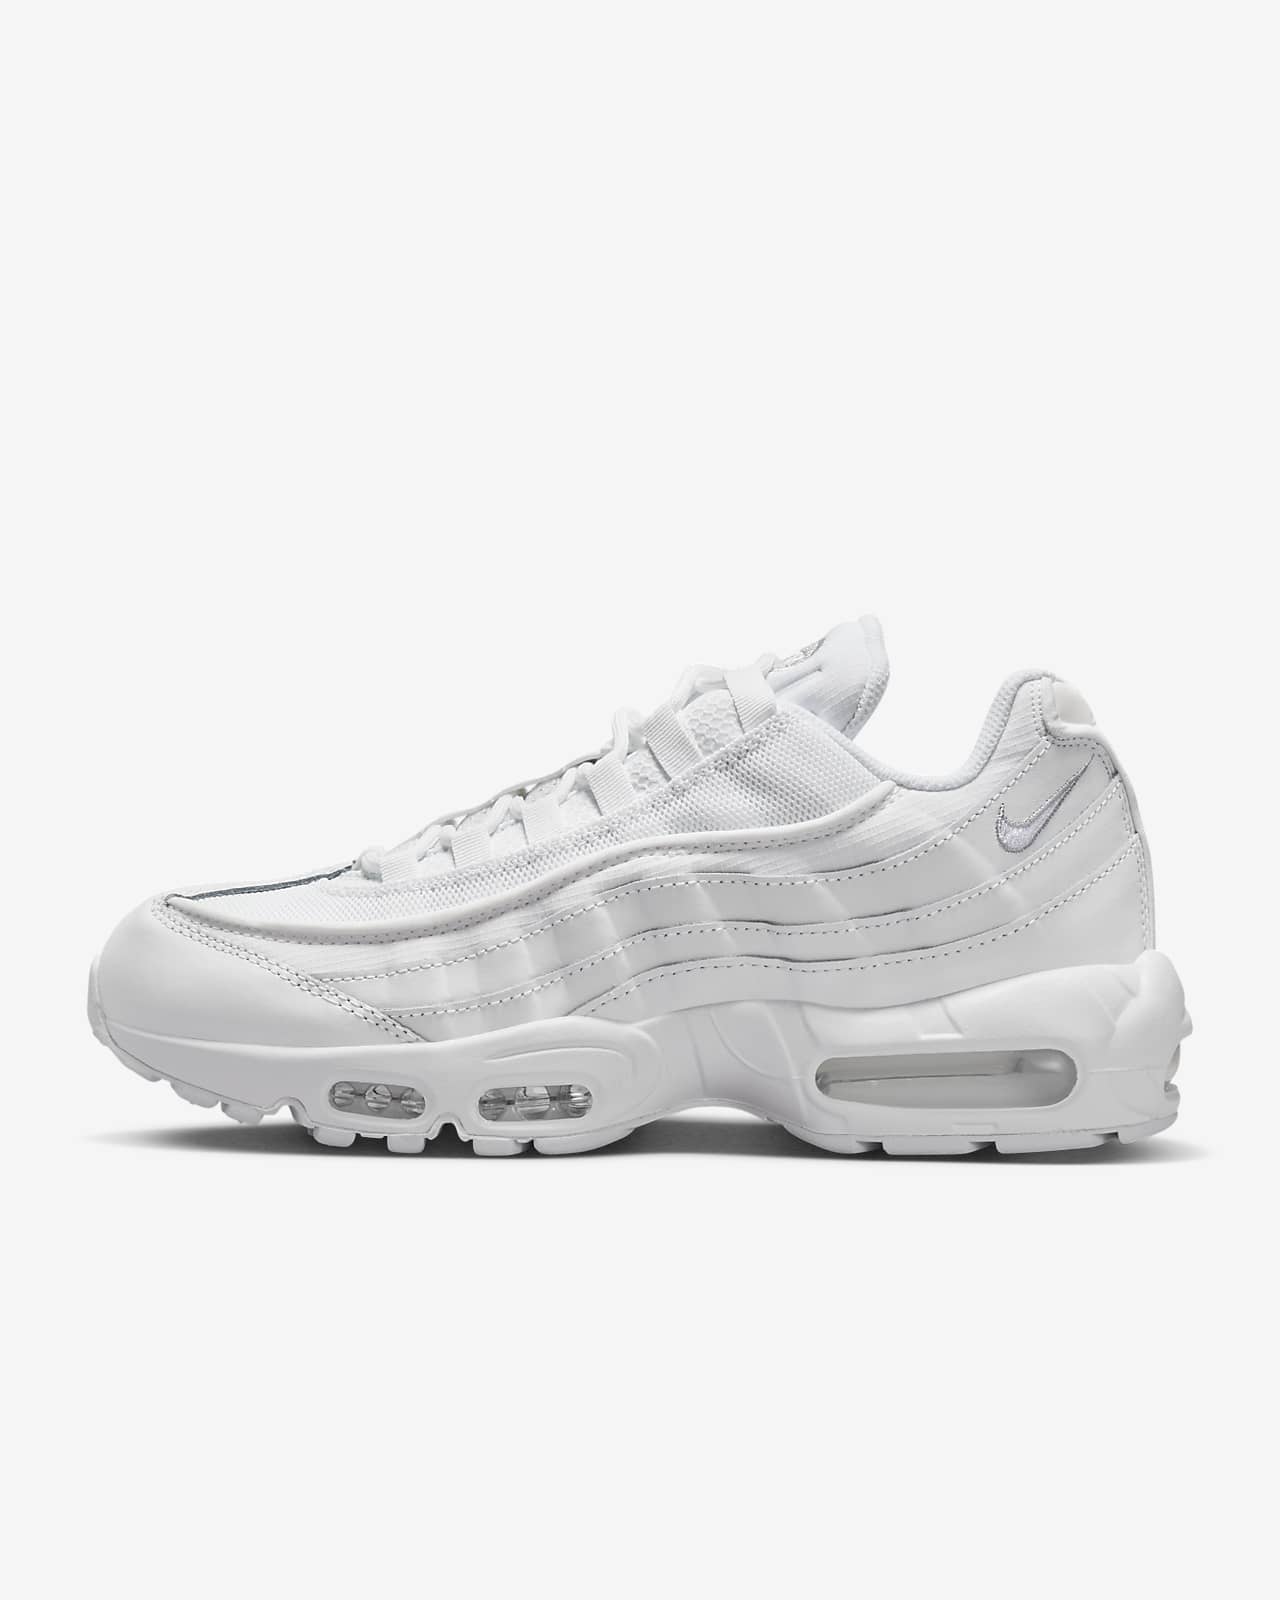 Nike AIR MAX 95 SE / GRIS Gris - Chaussures Chaussures-de-running